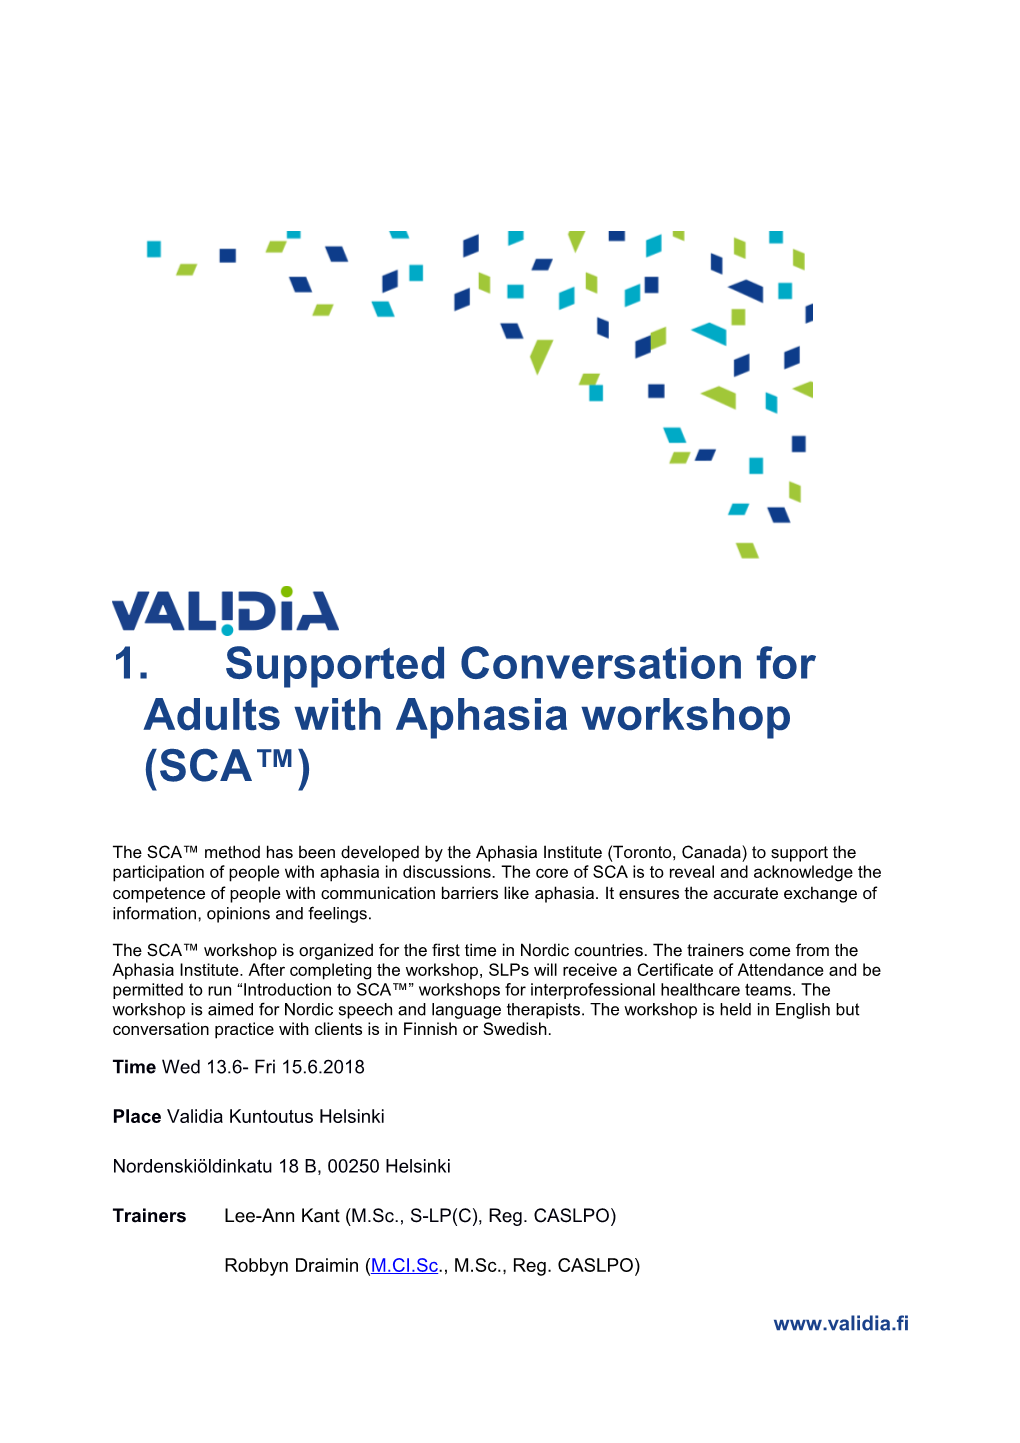 Supported Conversation for Adults with Aphasia Workshop (SCA )